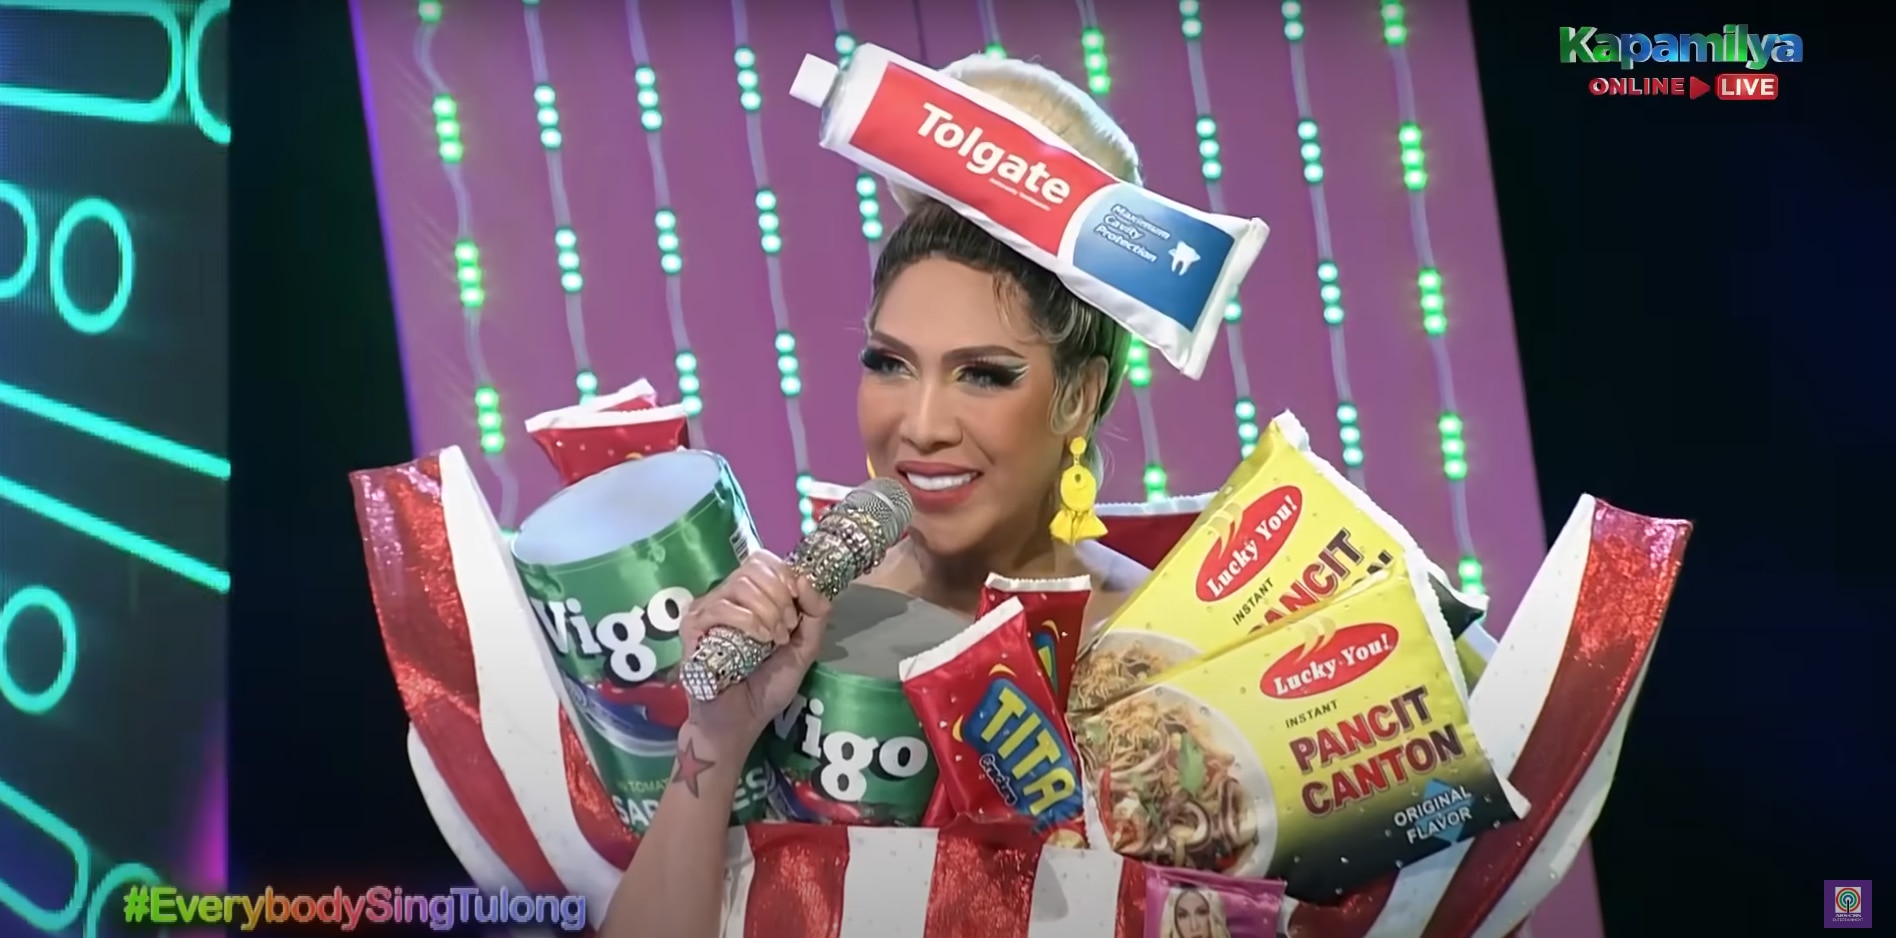 Vice Ganda gives additional cash to typhoon Karding survivors and rescuers in "Everybody, Sing!"